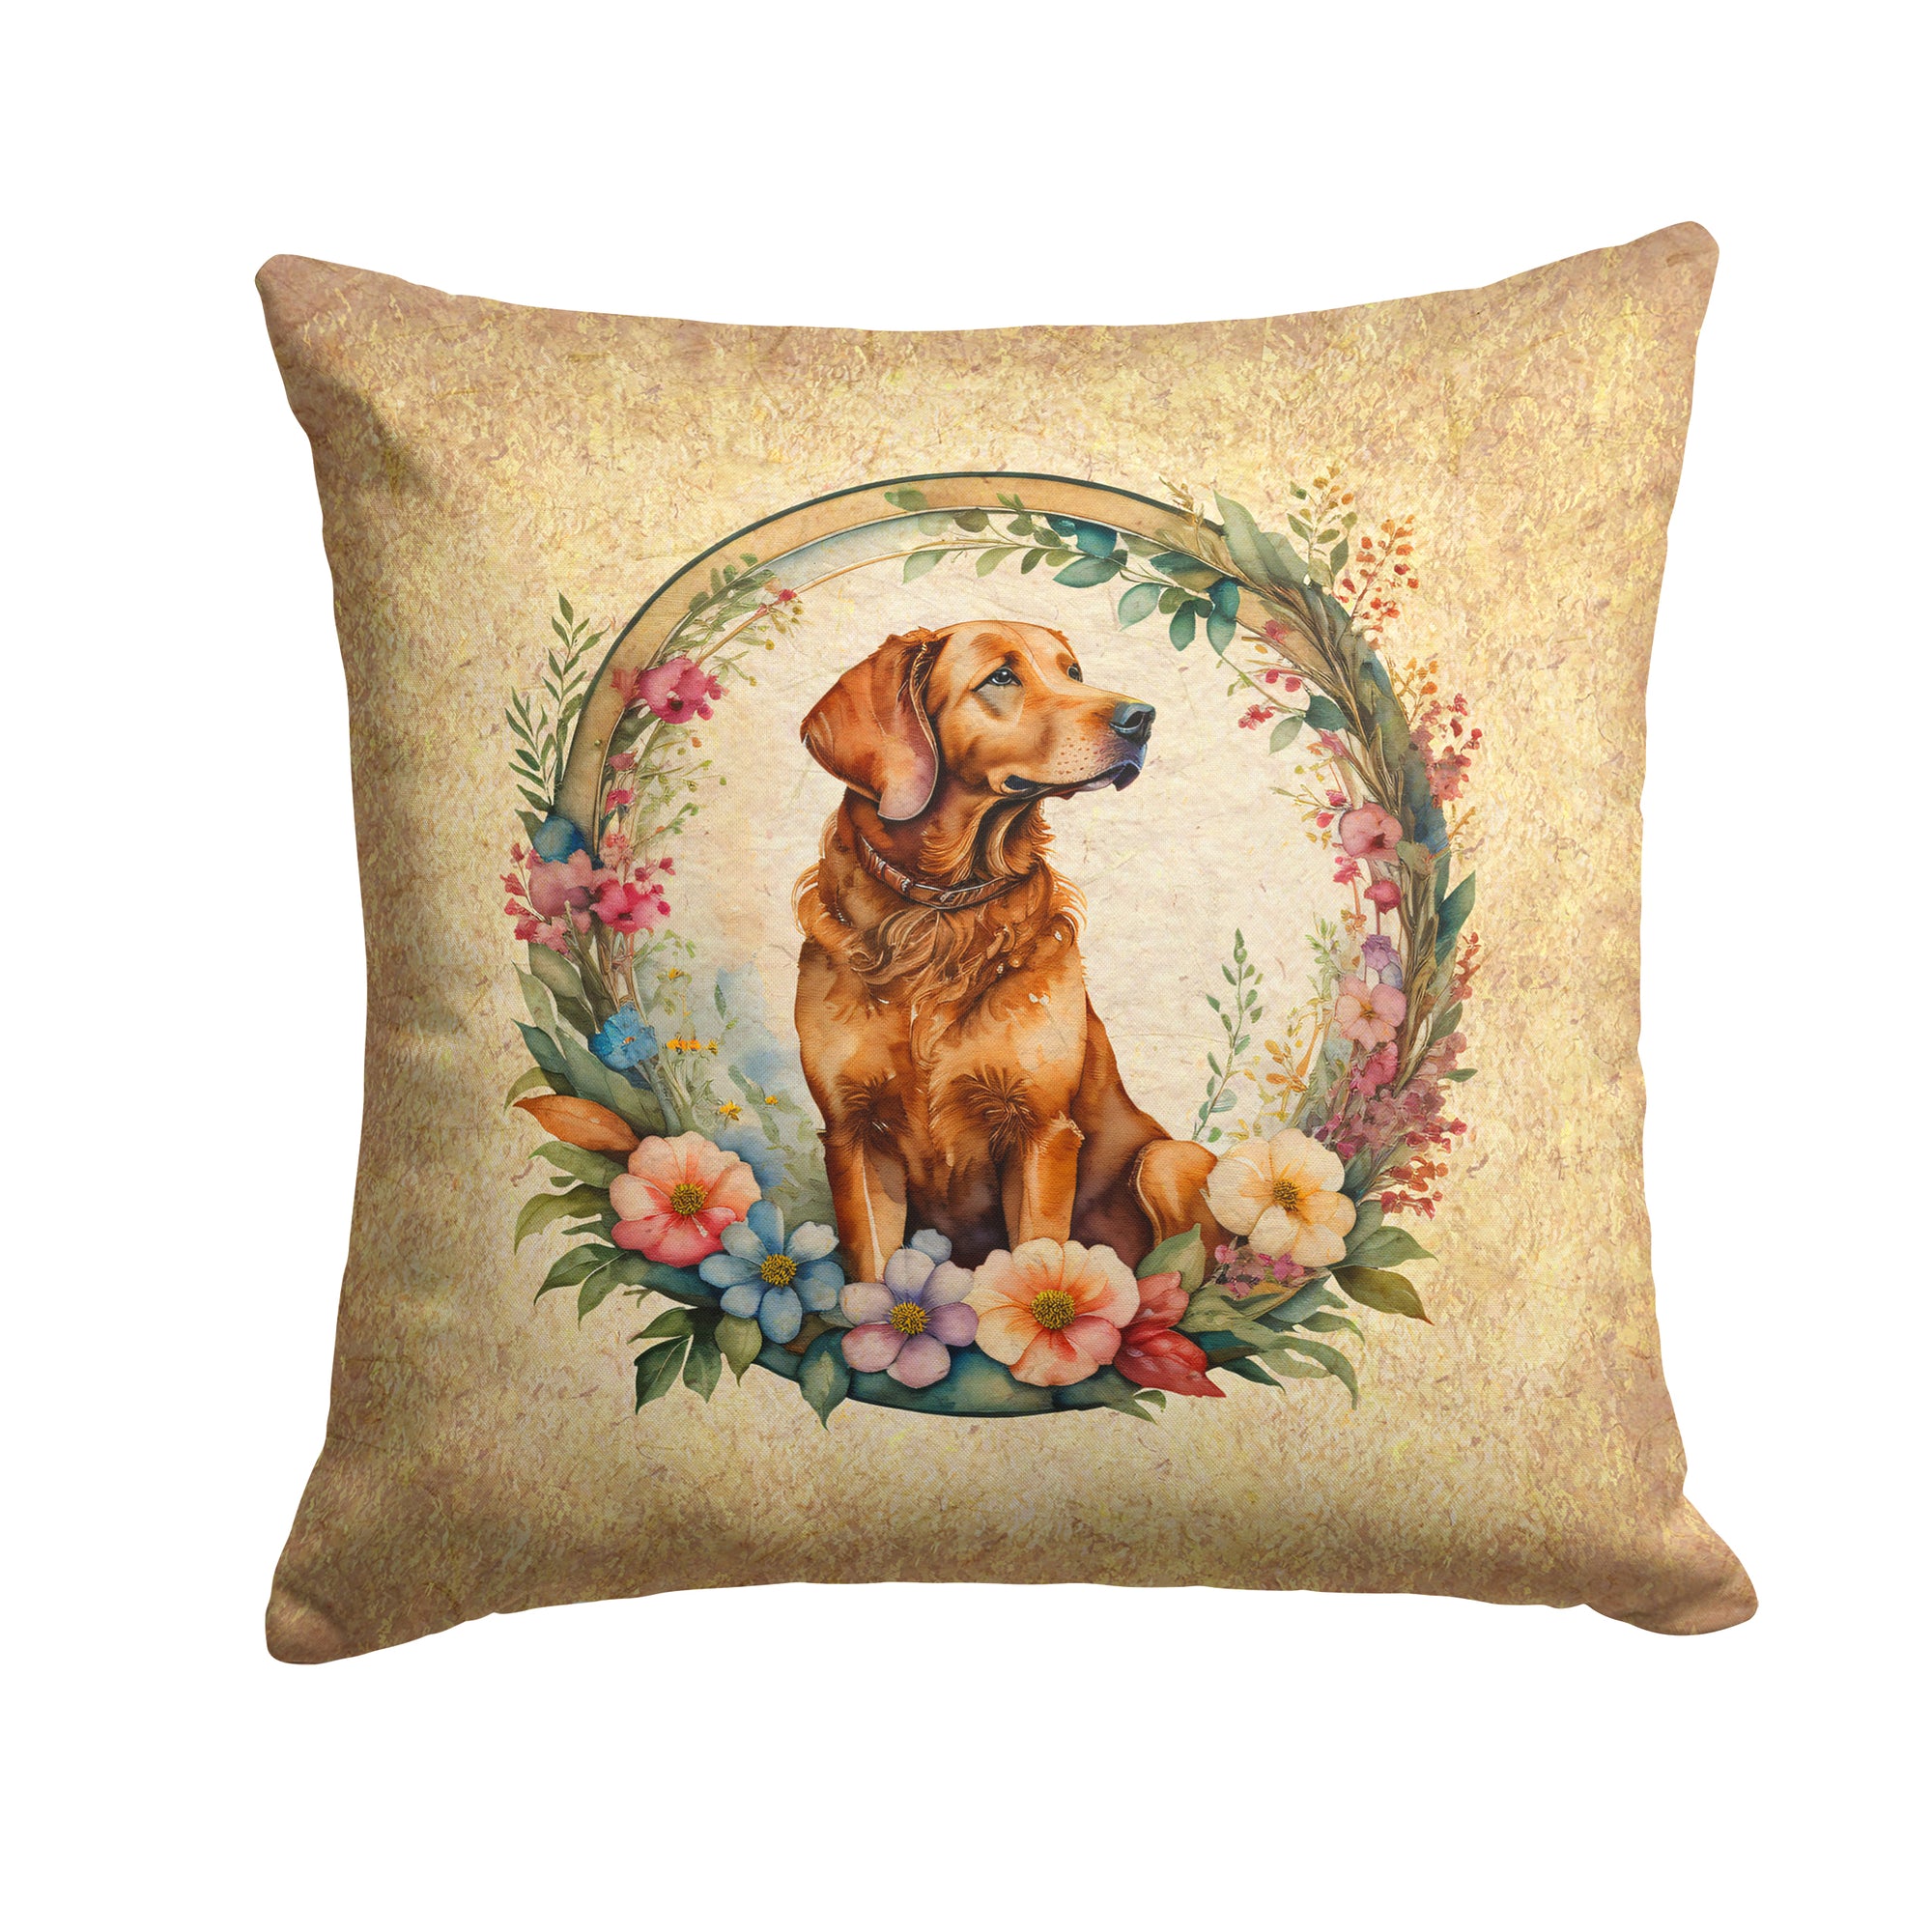 Buy this Chesapeake Bay Retriever and Flowers Fabric Decorative Pillow